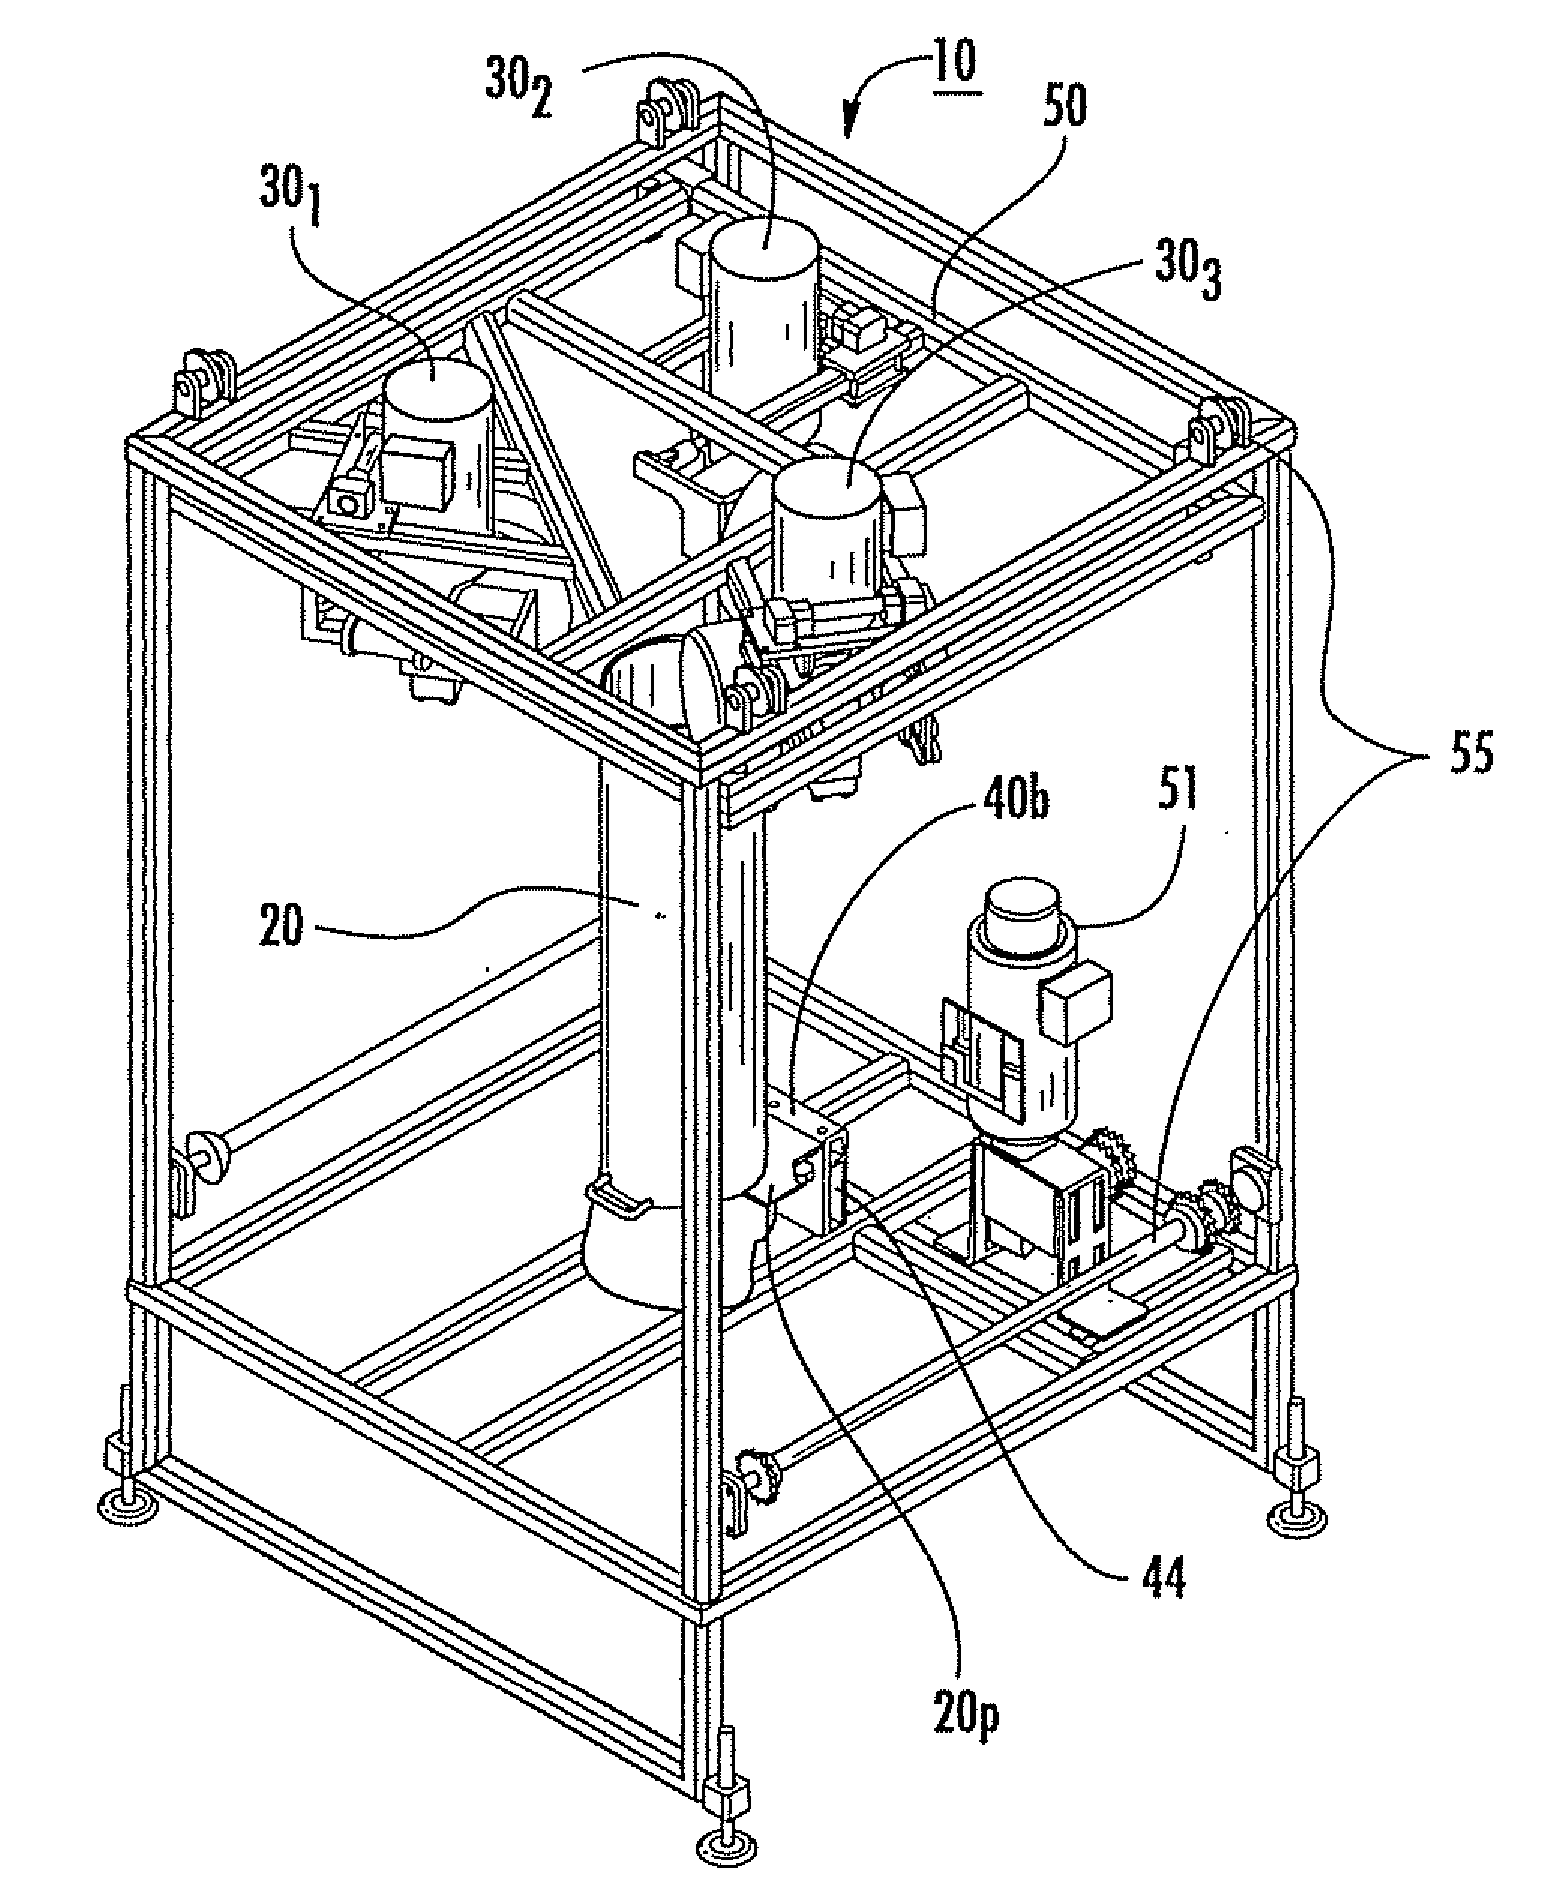 Low profile ruckers capable of rucking fixed diameter coverings and associated devices, methods, systems and computer program products